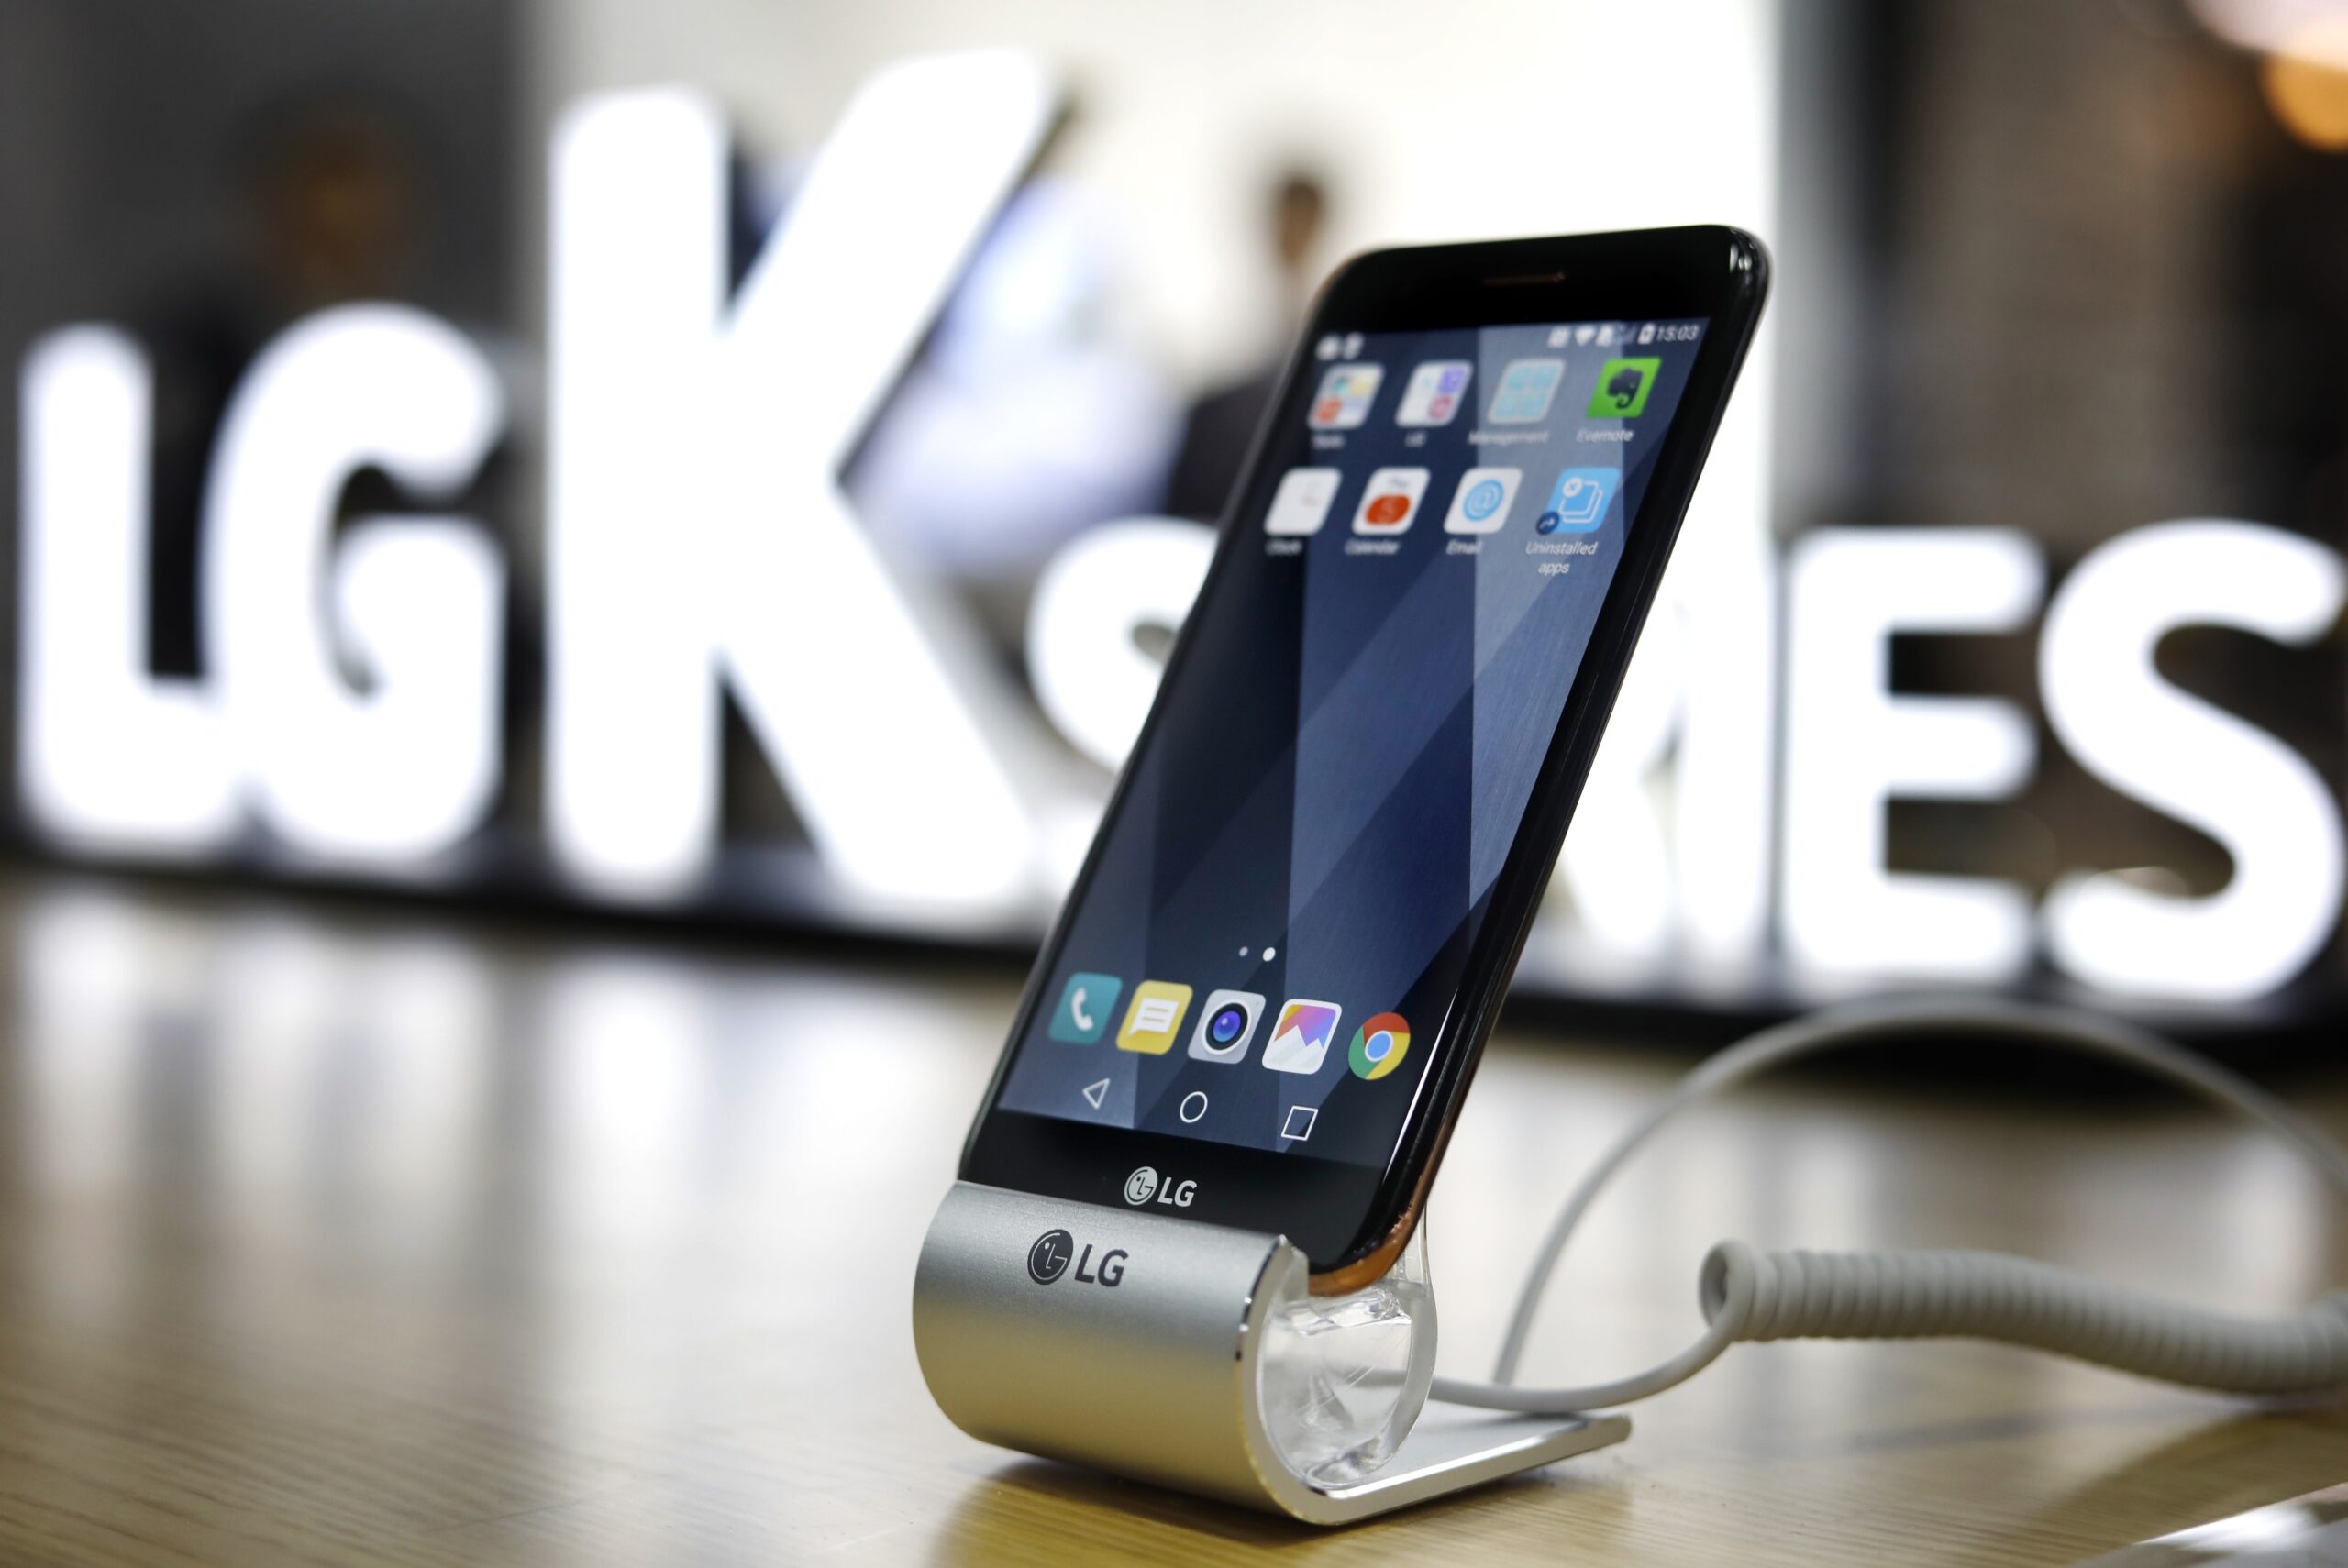 Close-up view of LG's K8 smartphone on display at the company's CES 2017 booth